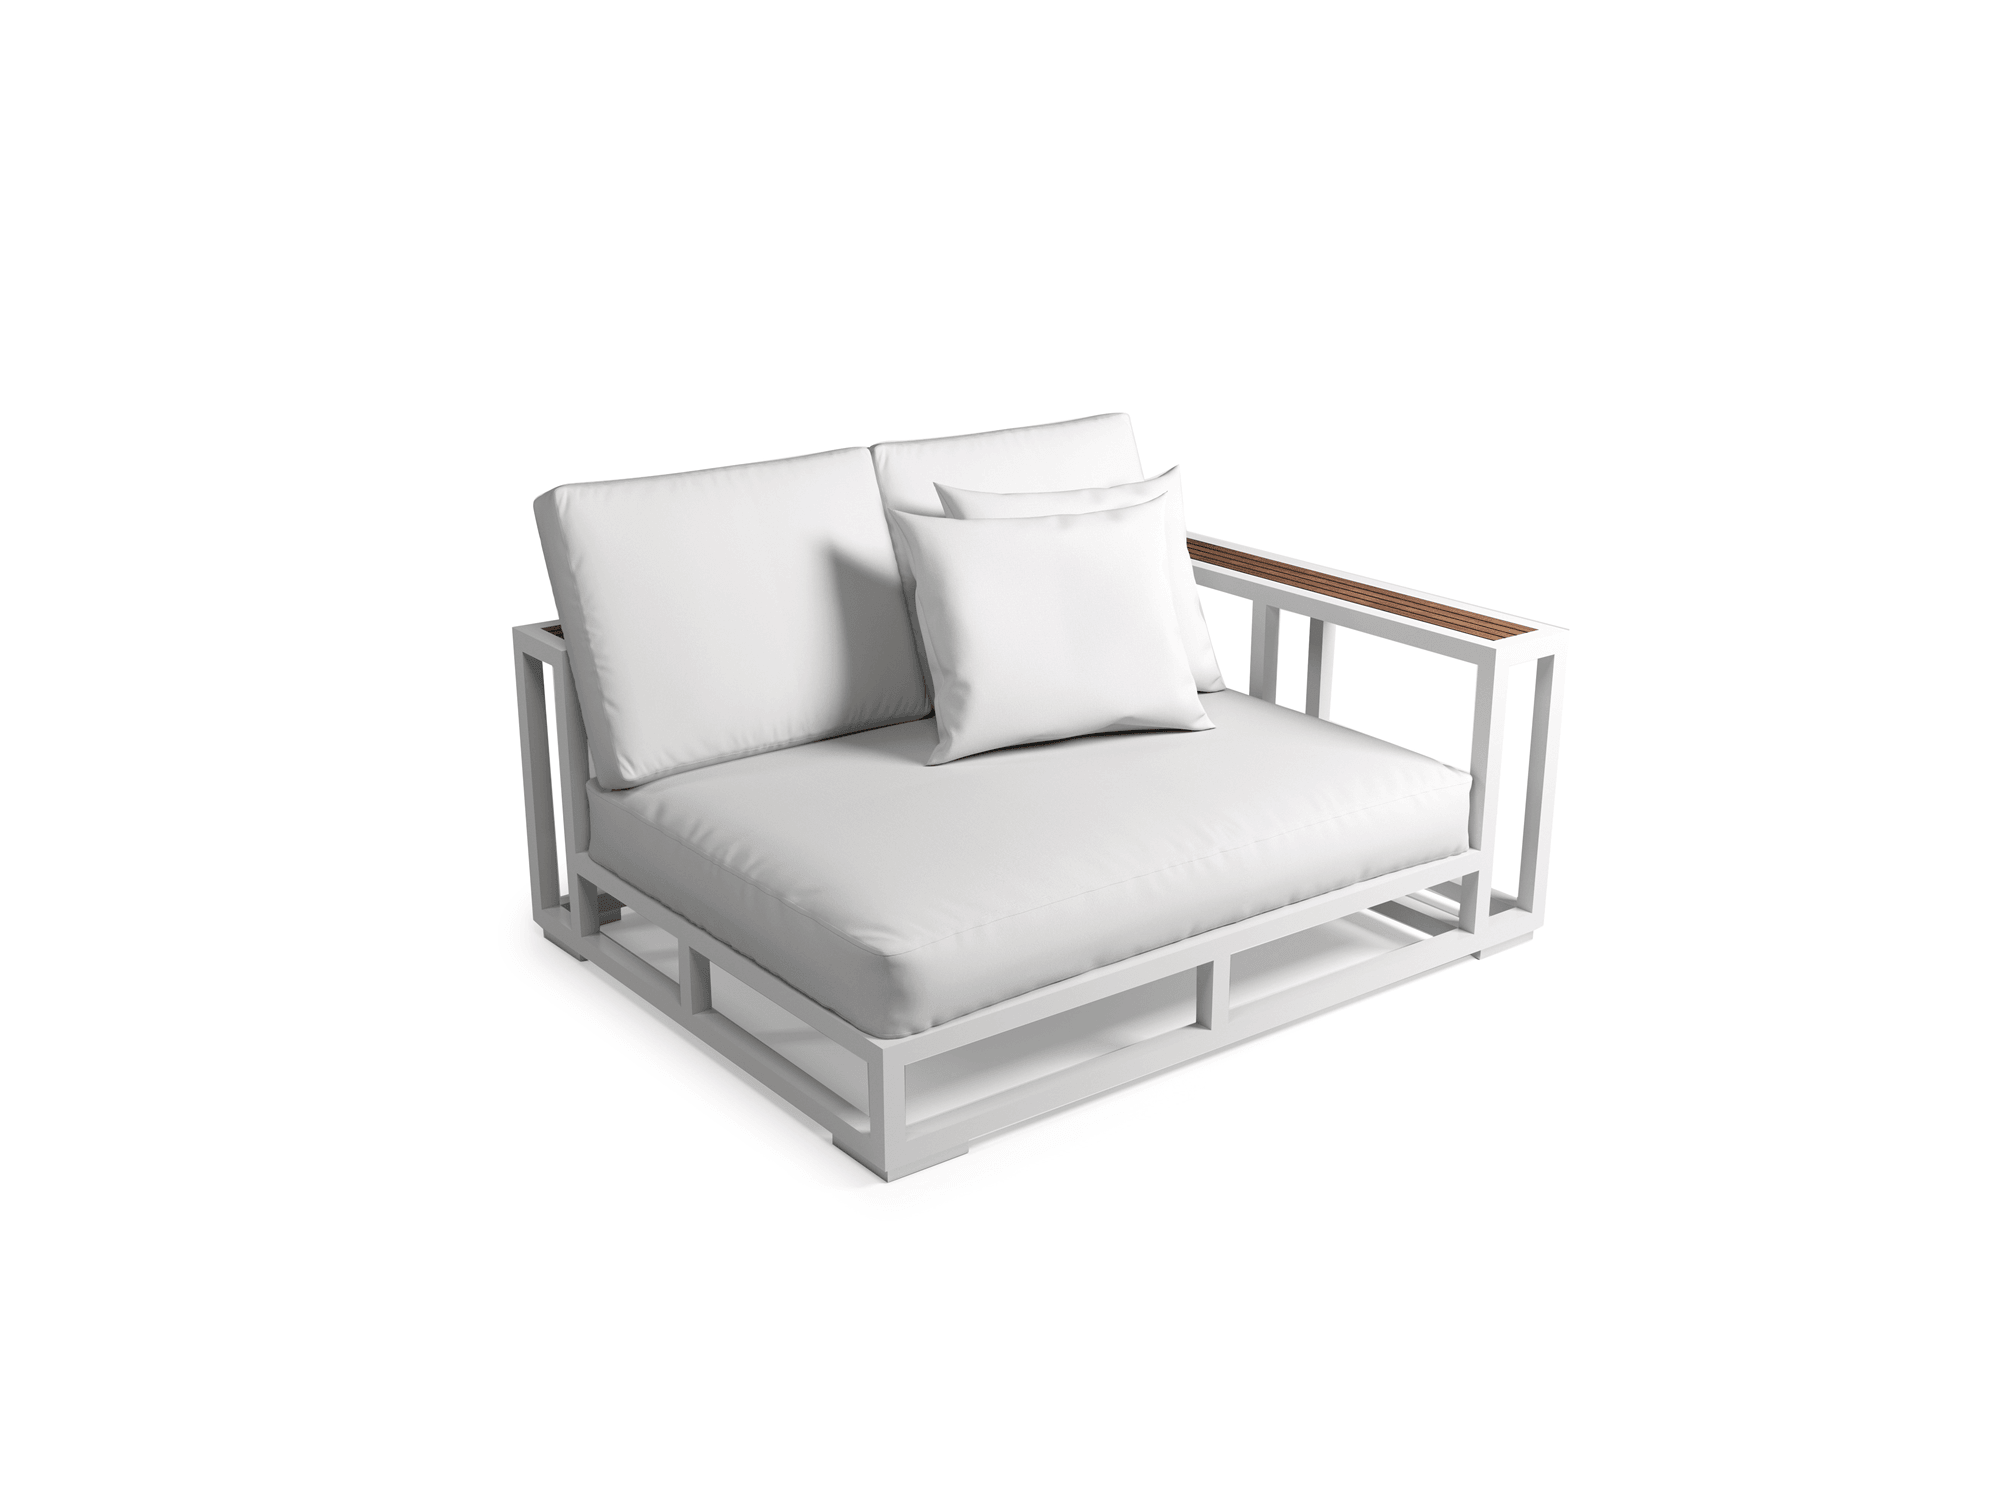 Delice Love seat in Griege - Euro Living Furniture